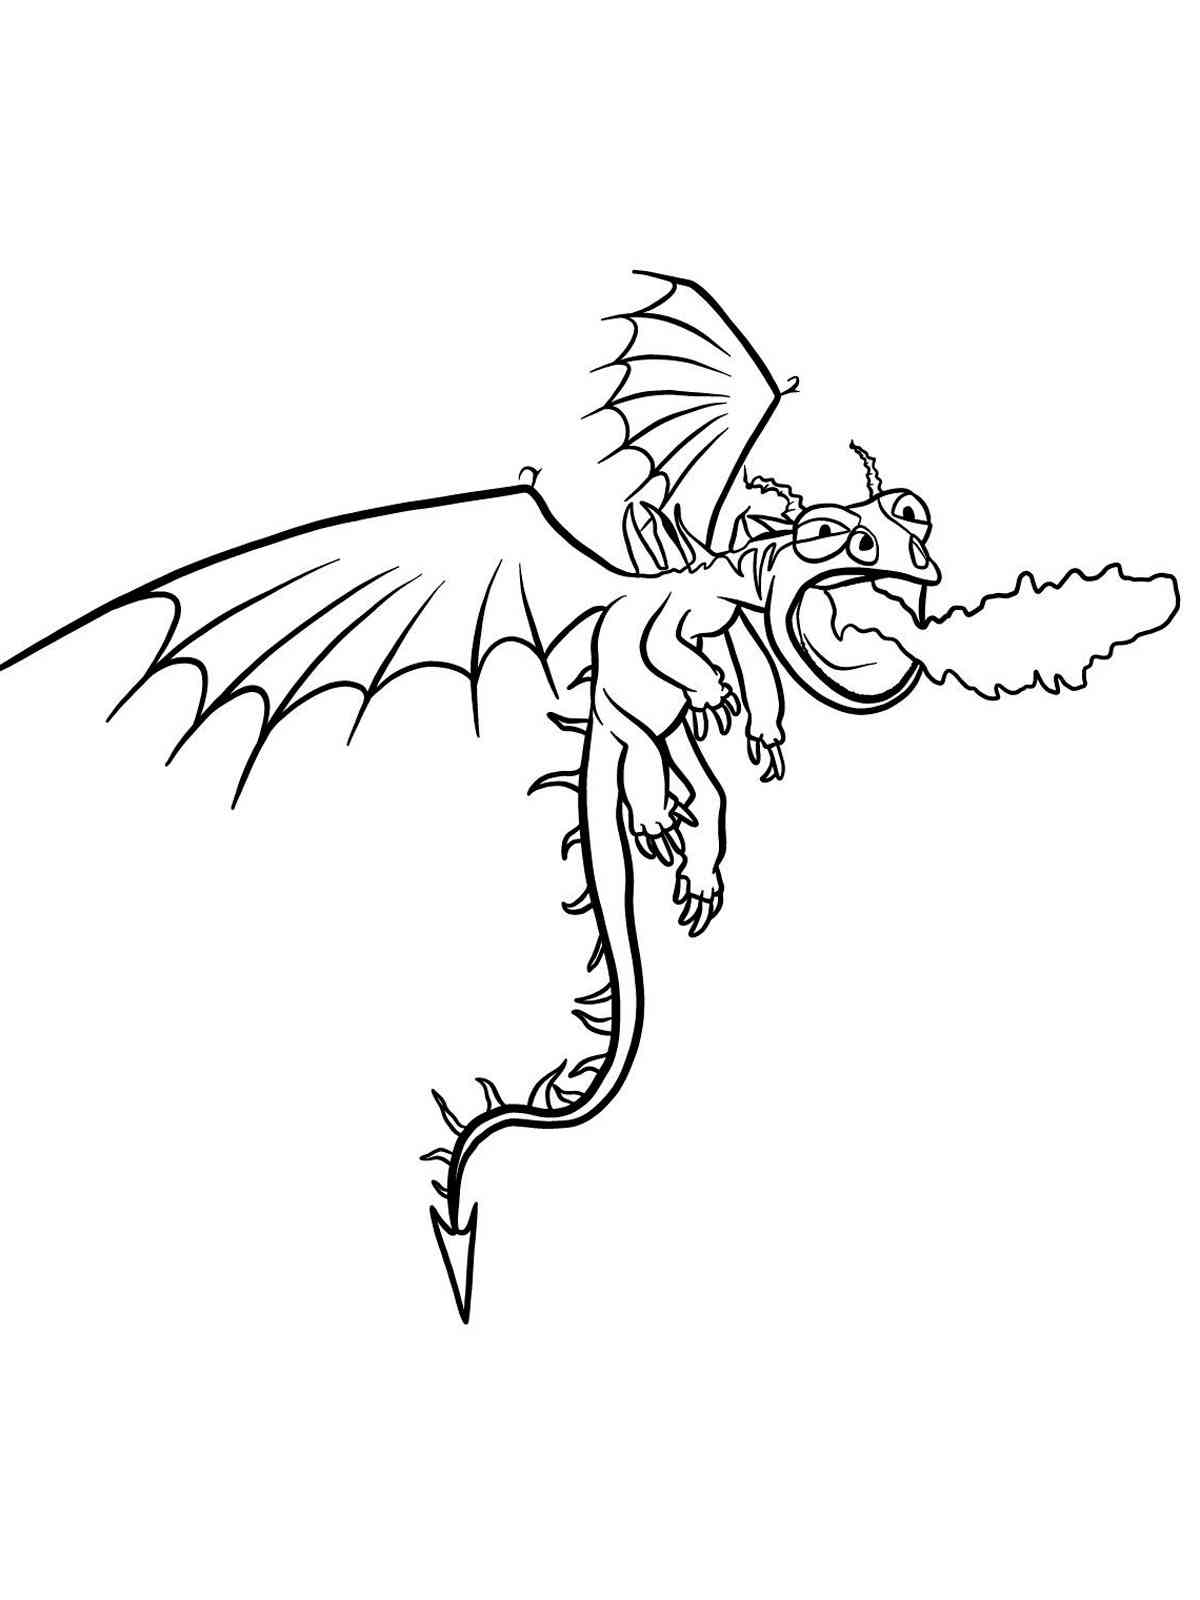 How To Train Your Dragon 6 coloring page